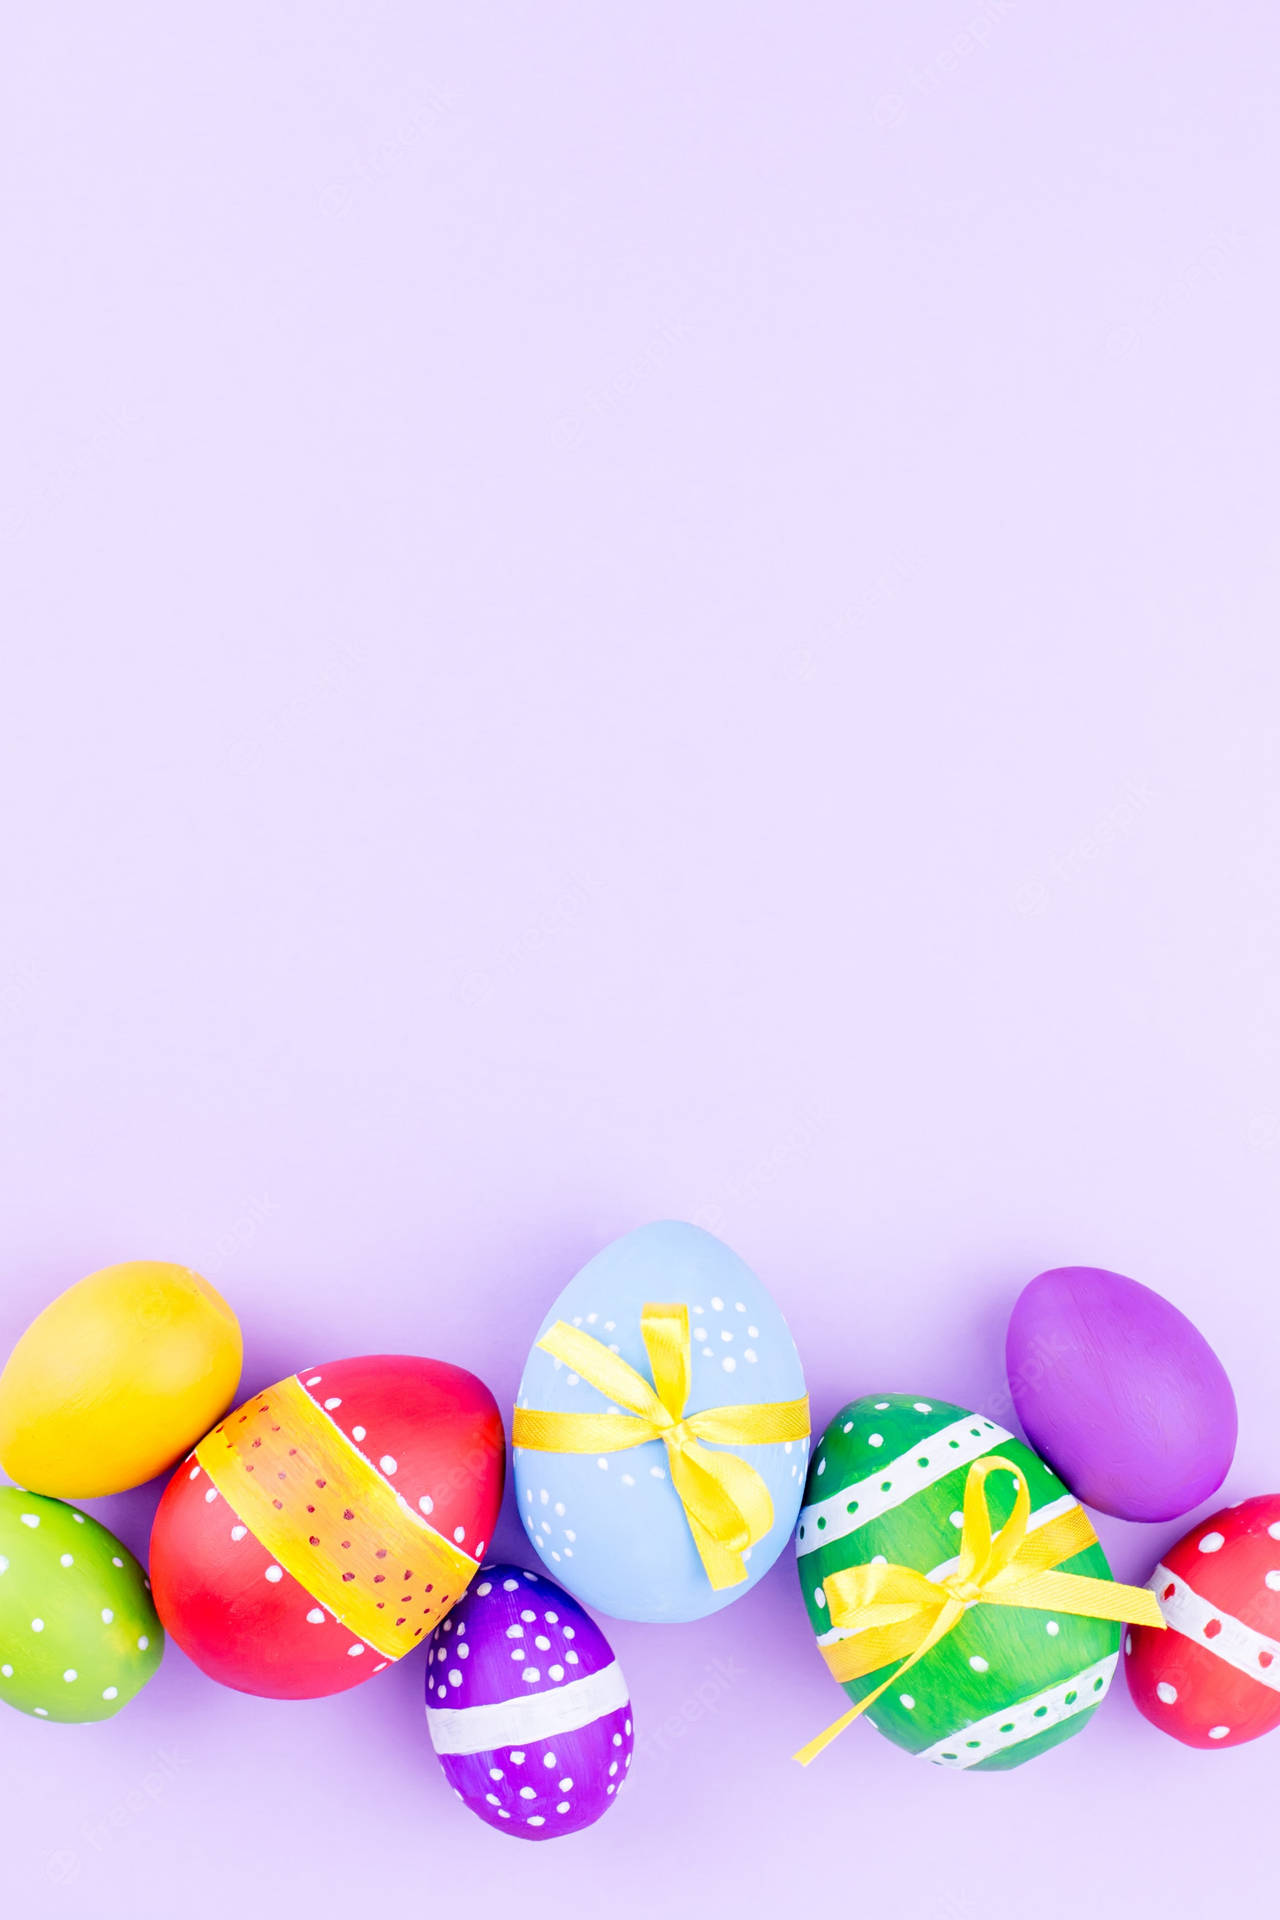 A vibrant Easter-themed smartphone with a blue backplate Wallpaper